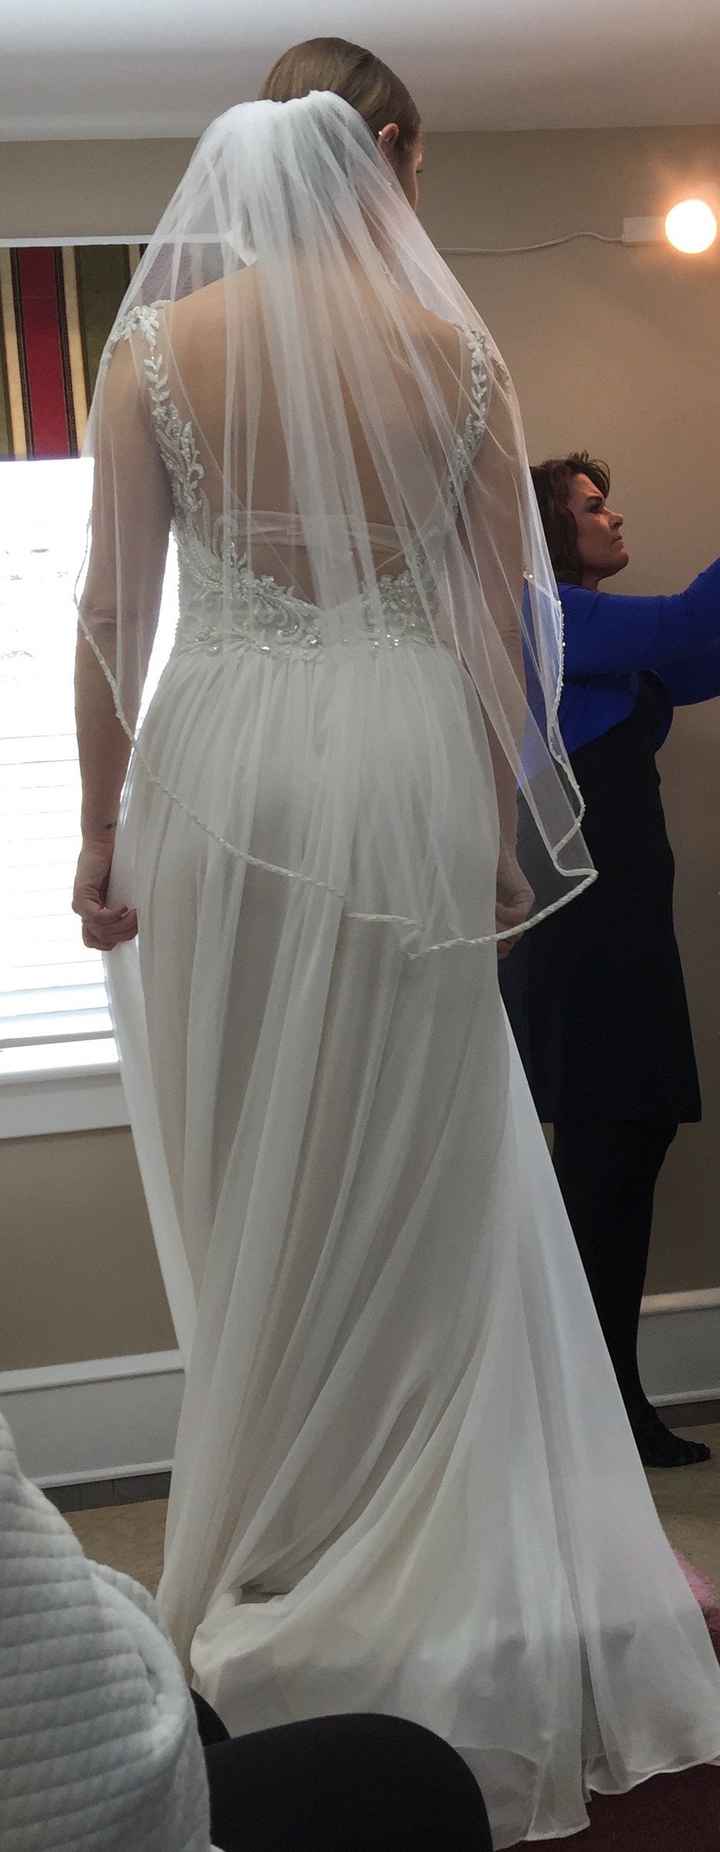 I said YES to the dress! How to accessorize?